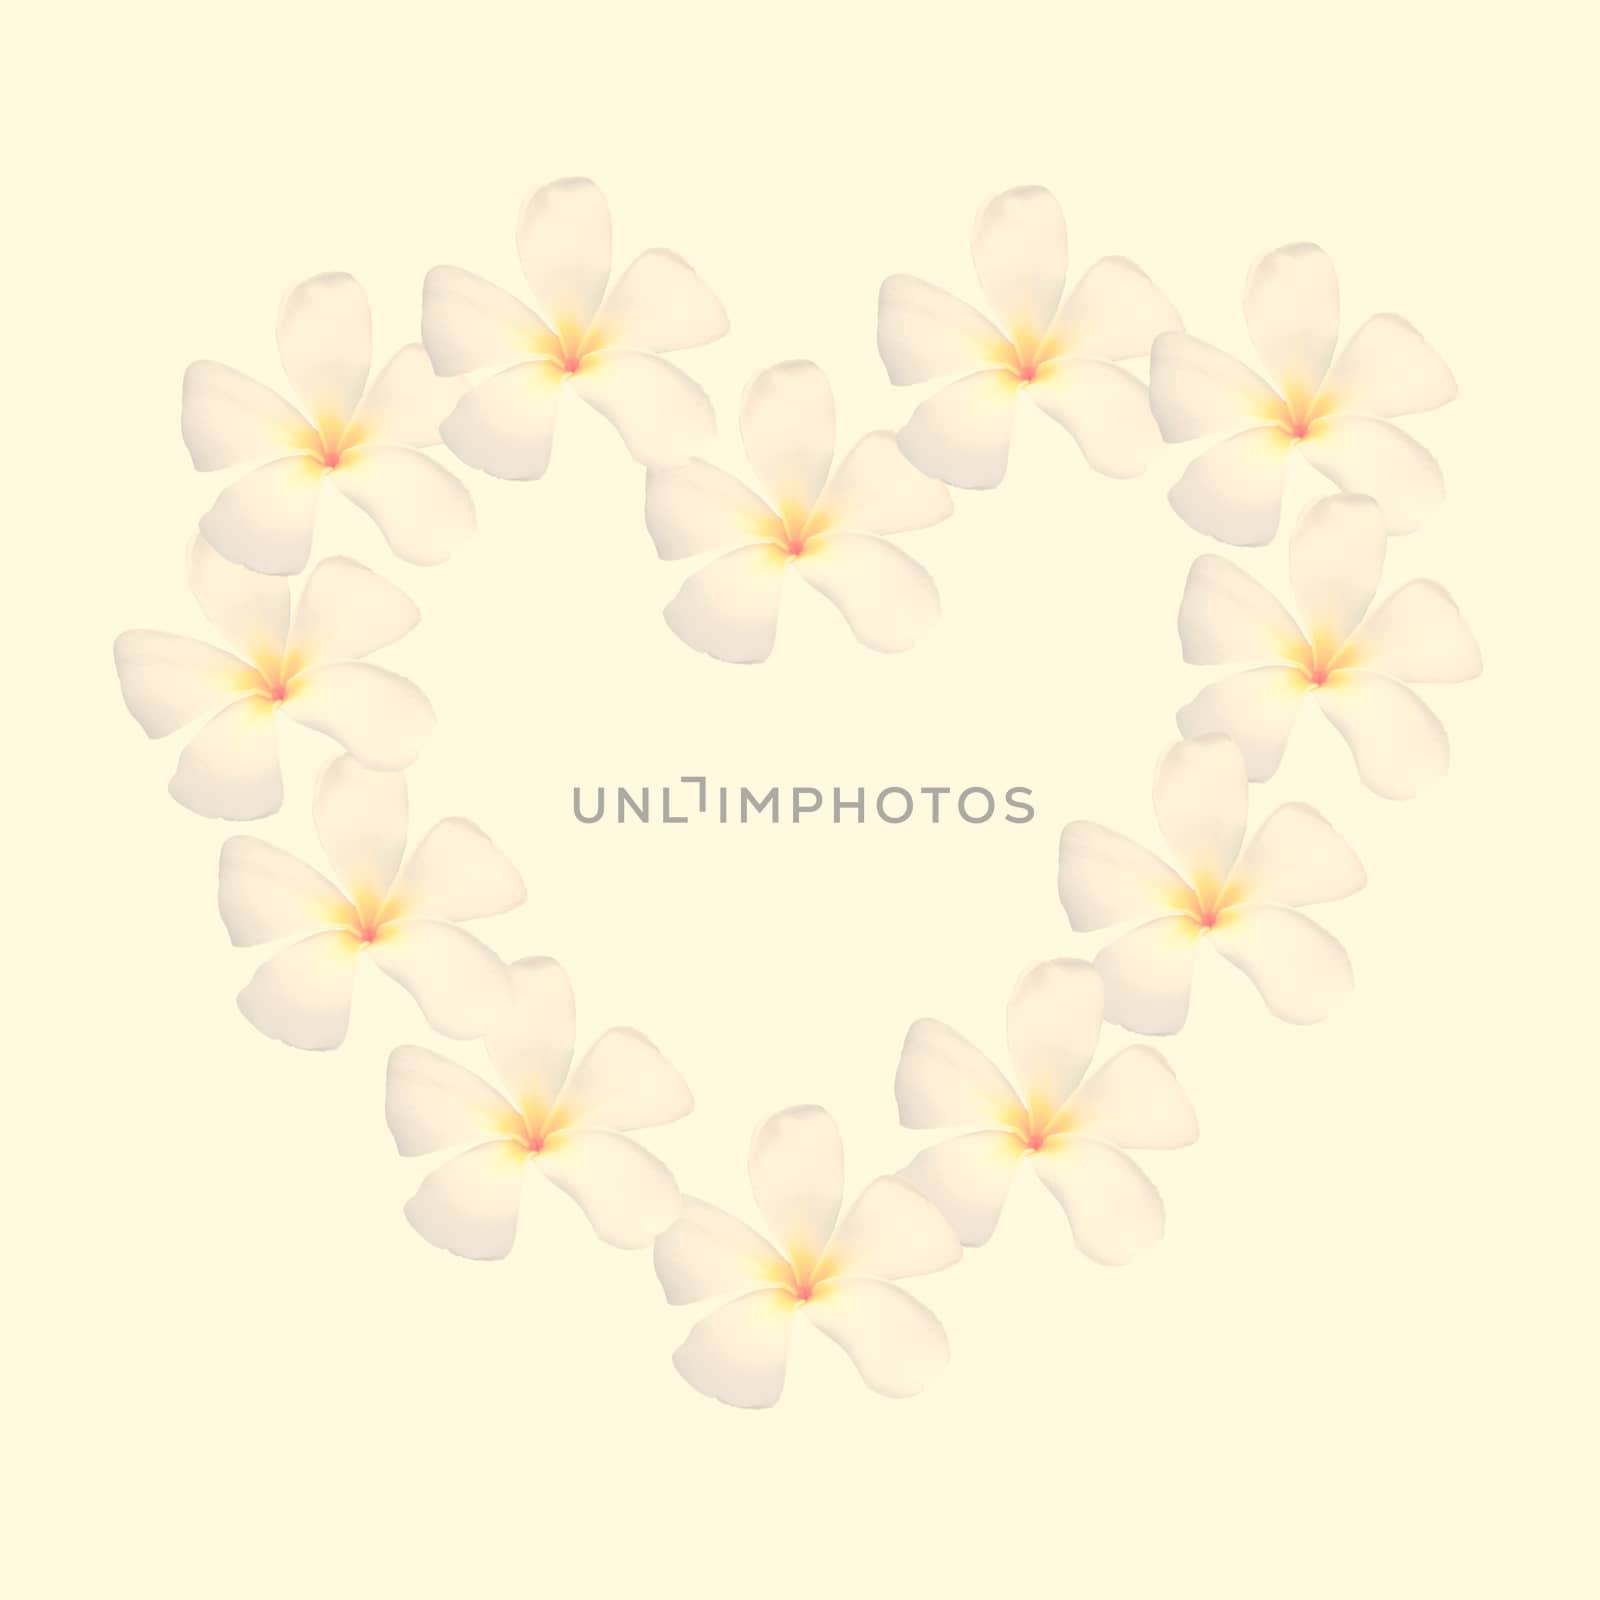 frangipani shape as heart isolated with retro filter effect by nuchylee